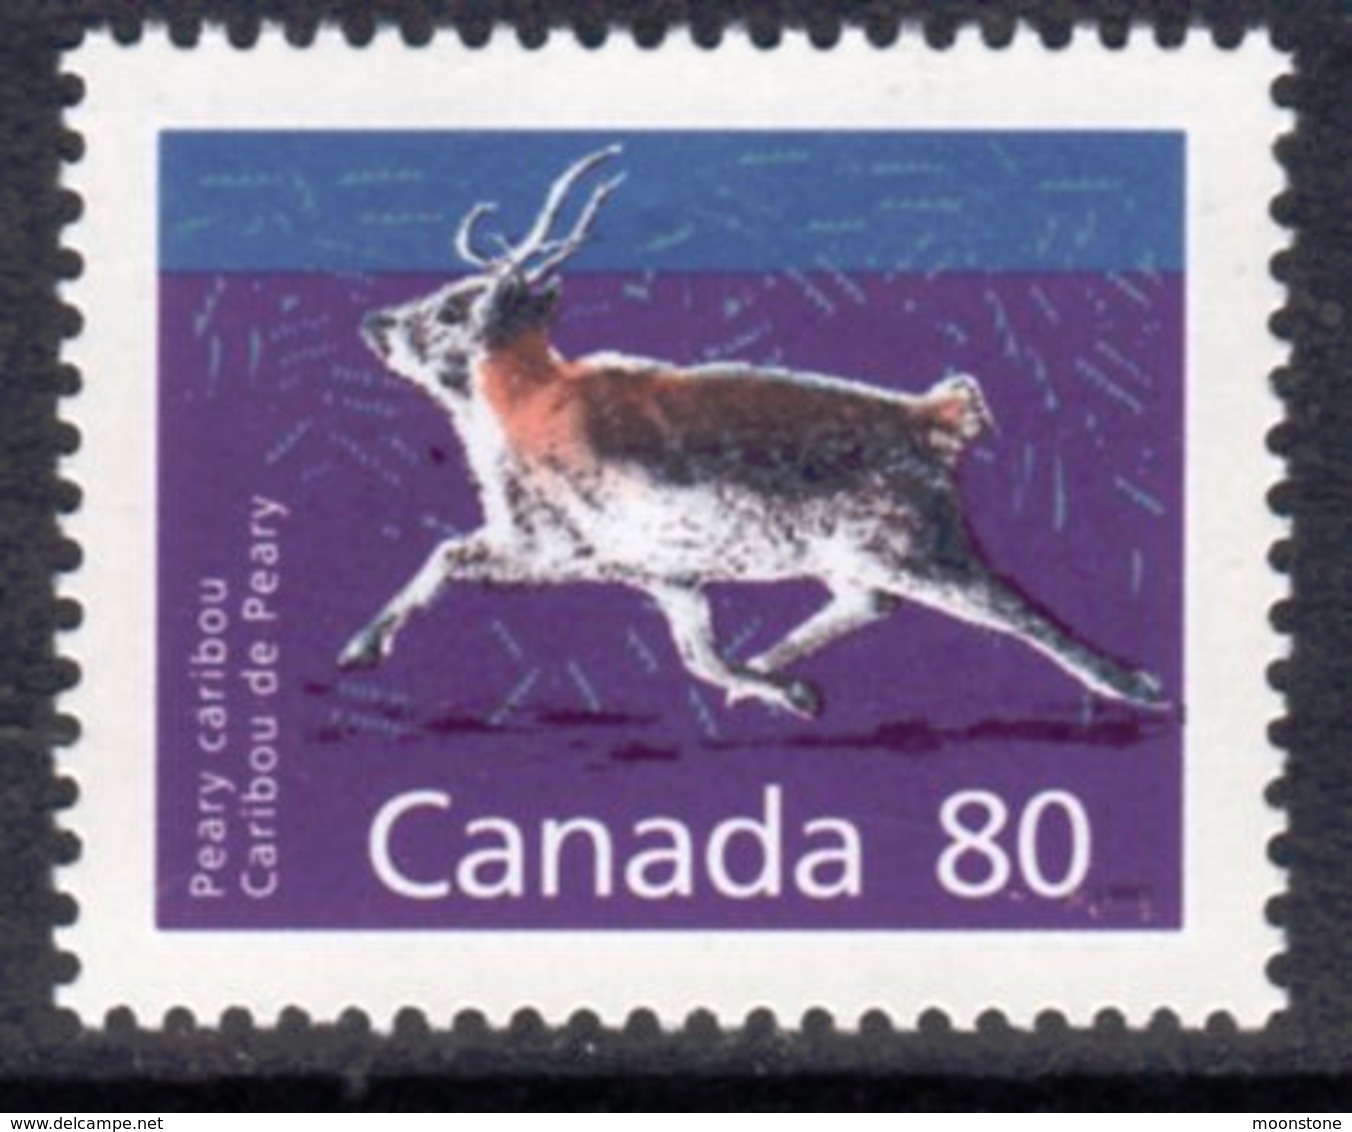 Canada 1988-93 Mammals Definitives 80c Peary Caribou Value, MNH, SG 1276c - Unused Stamps